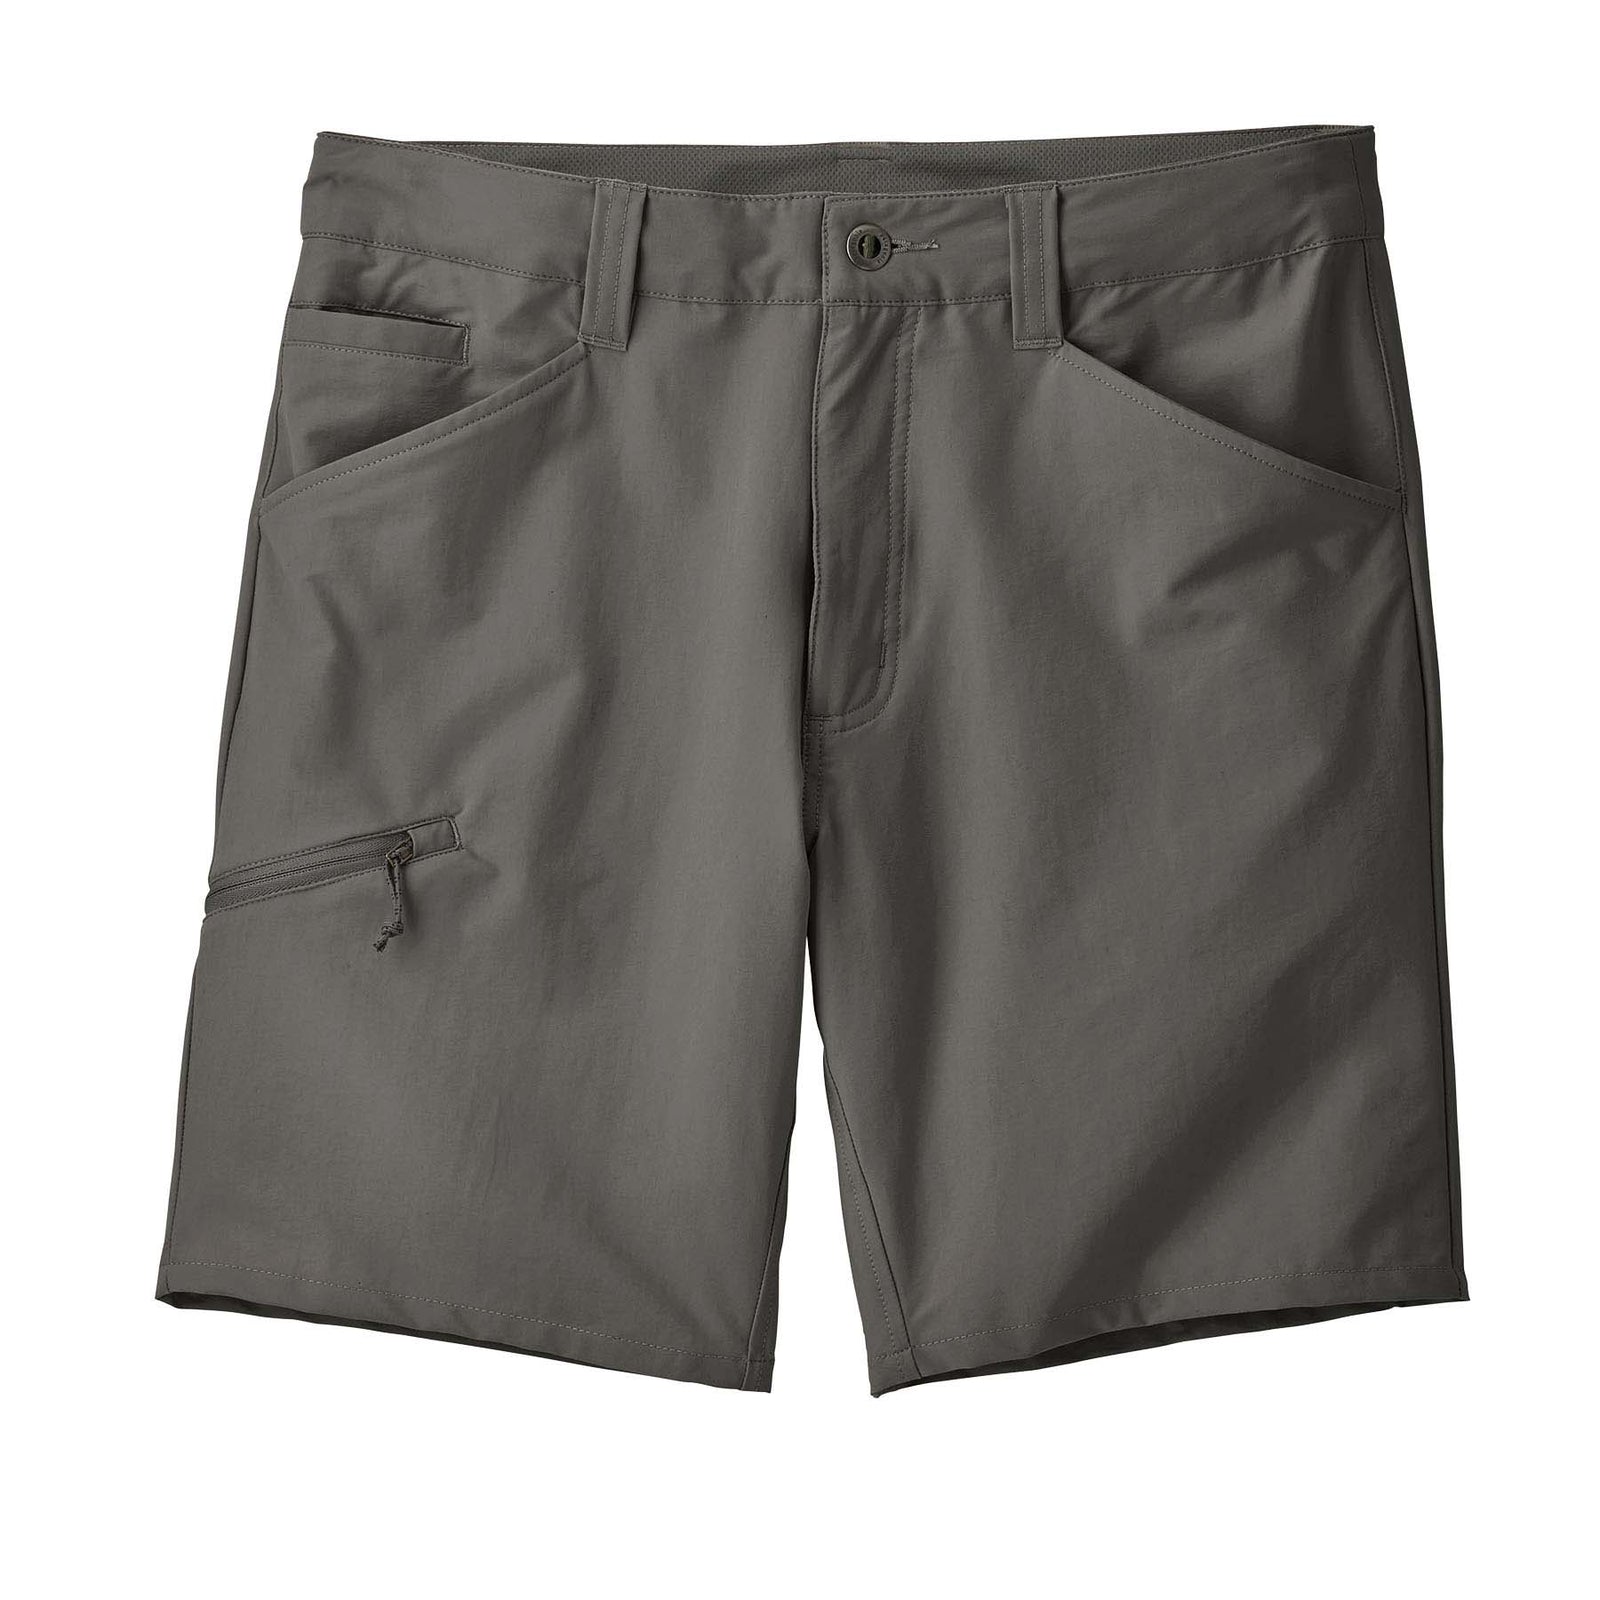 Patagonia Men's Quandary Shorts - 8 in. 2023 FGE FORGE GREY